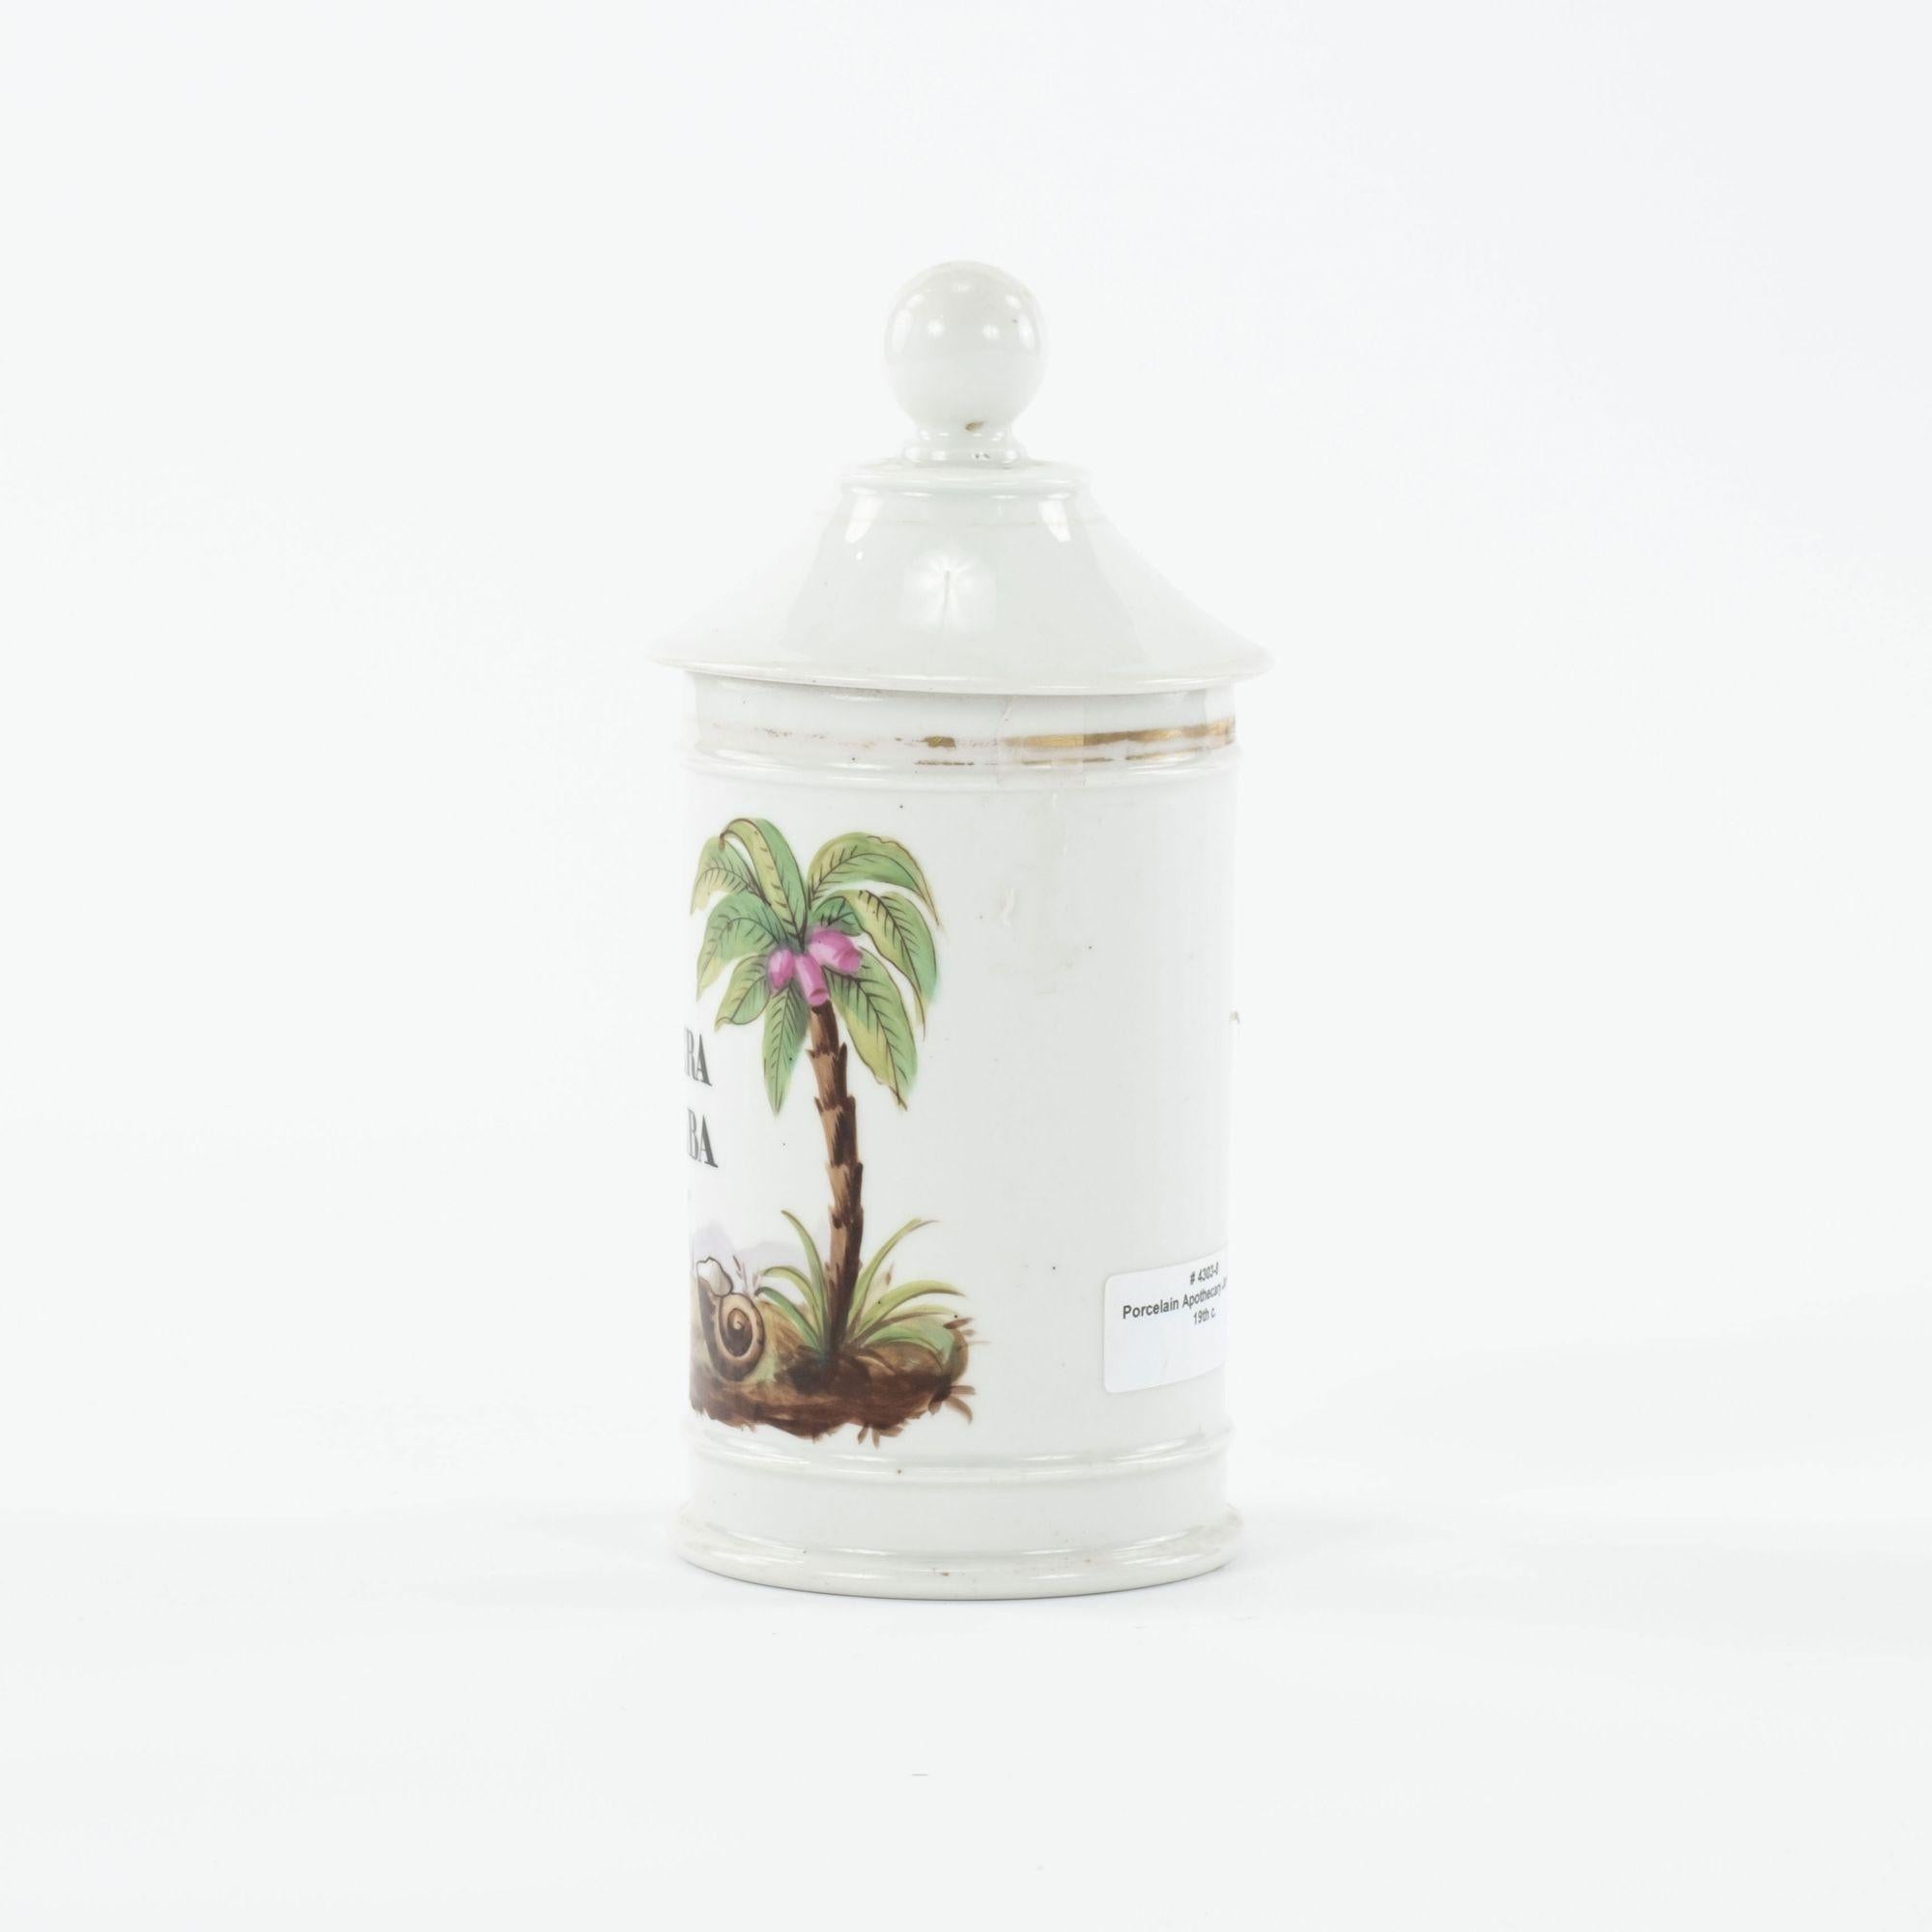 Lidded porcelain apothecary jar, with hand-painted Latin label 